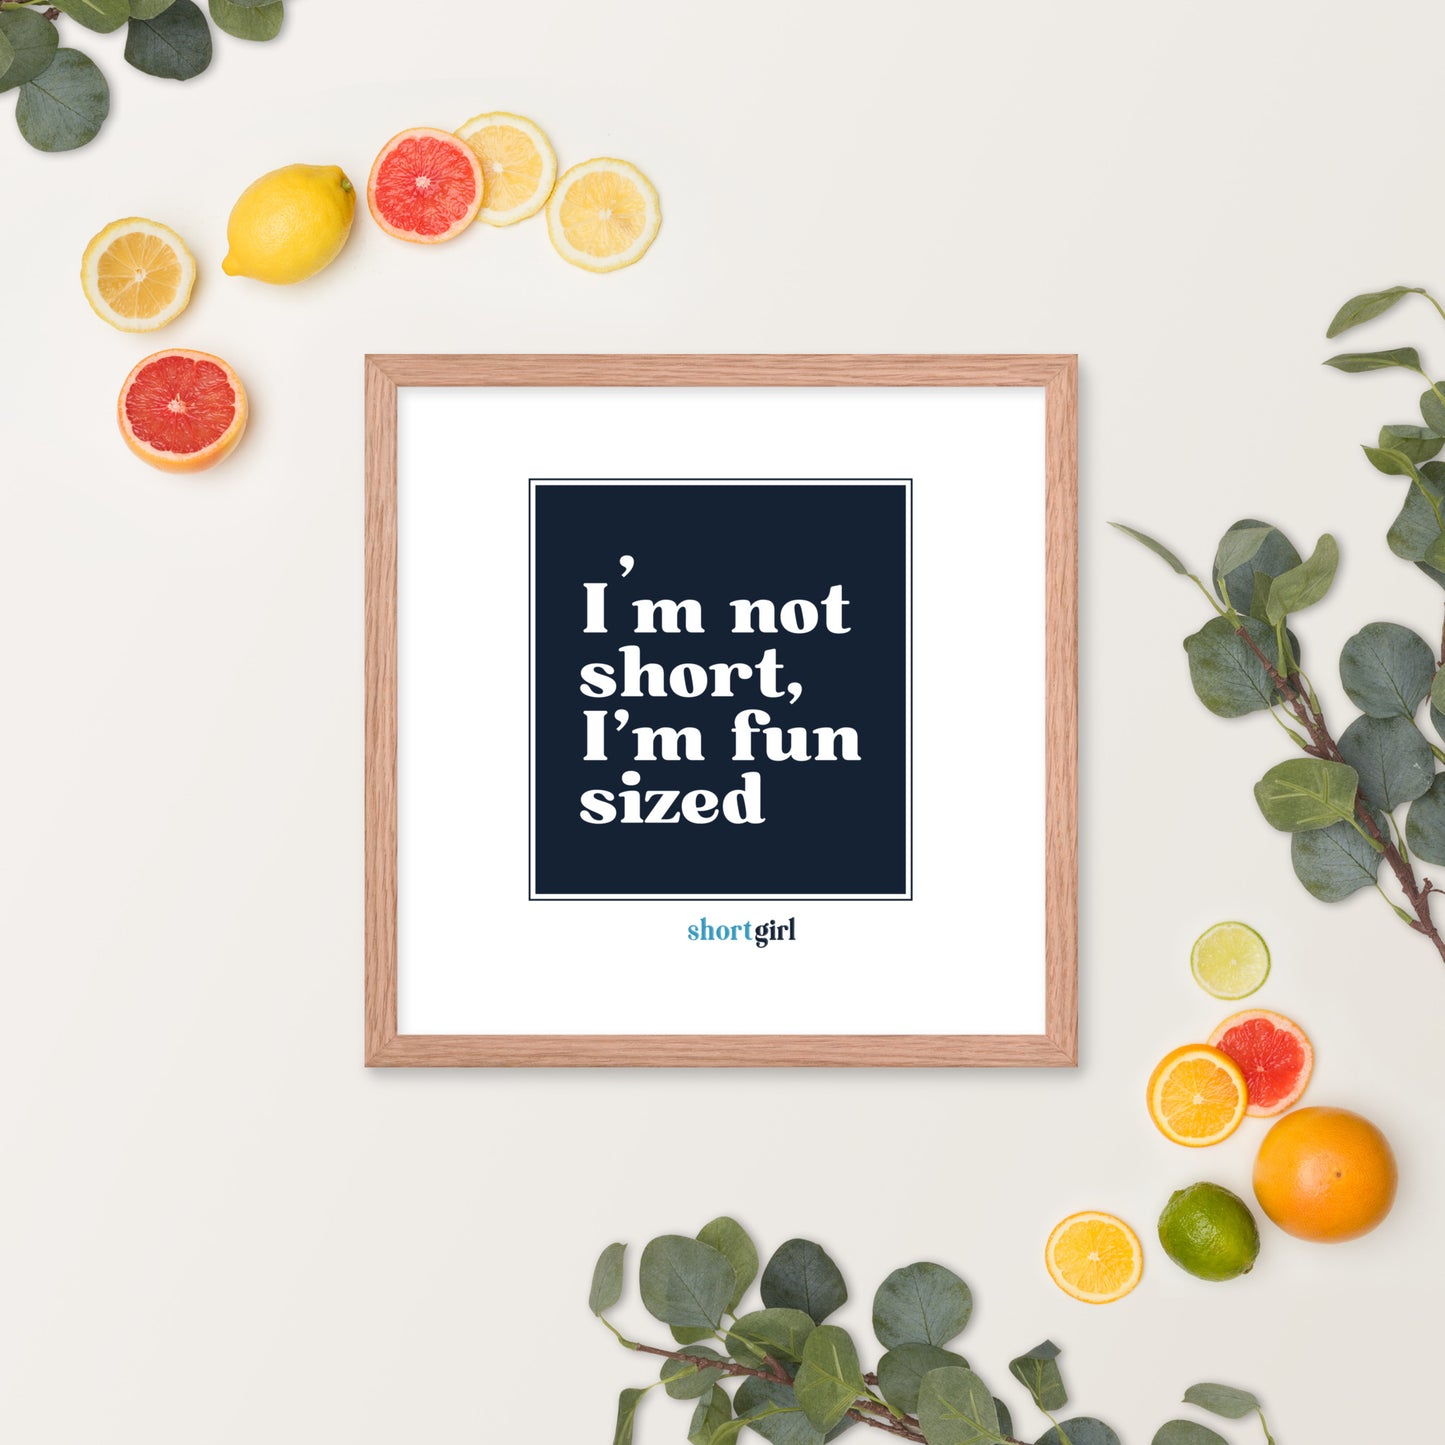 Framed photo paper poster - I'm not short, I'm fun sized